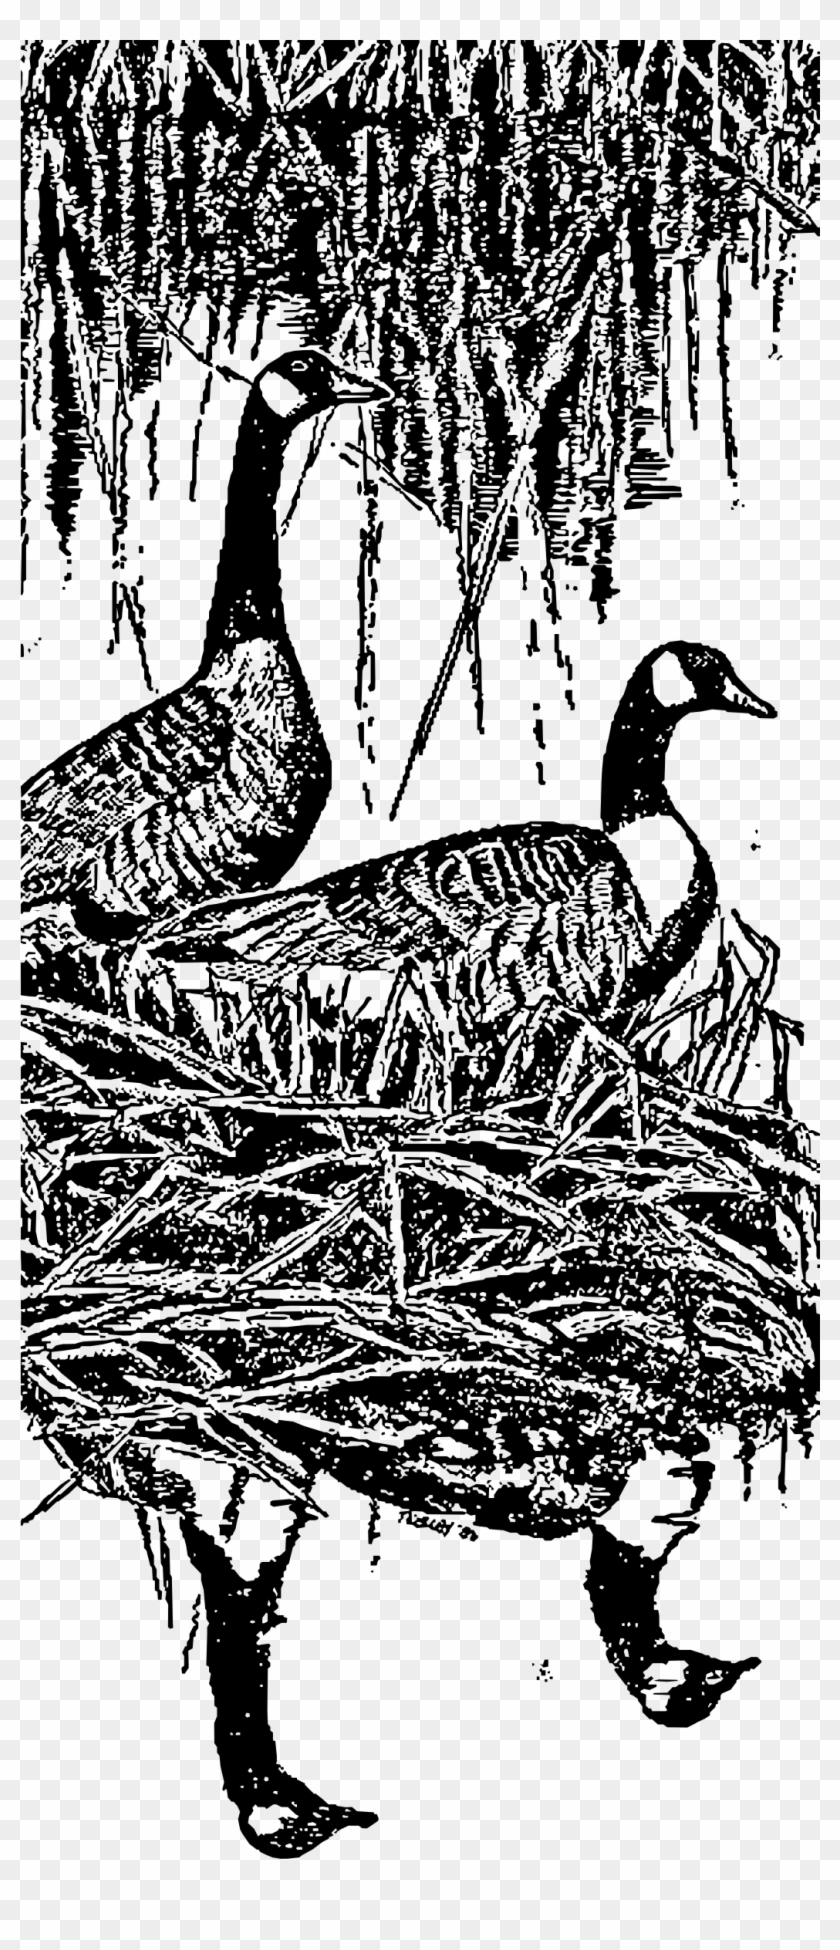 This Free Icons Png Design Of Nesting Canada Geese - Duck Clipart #3930679